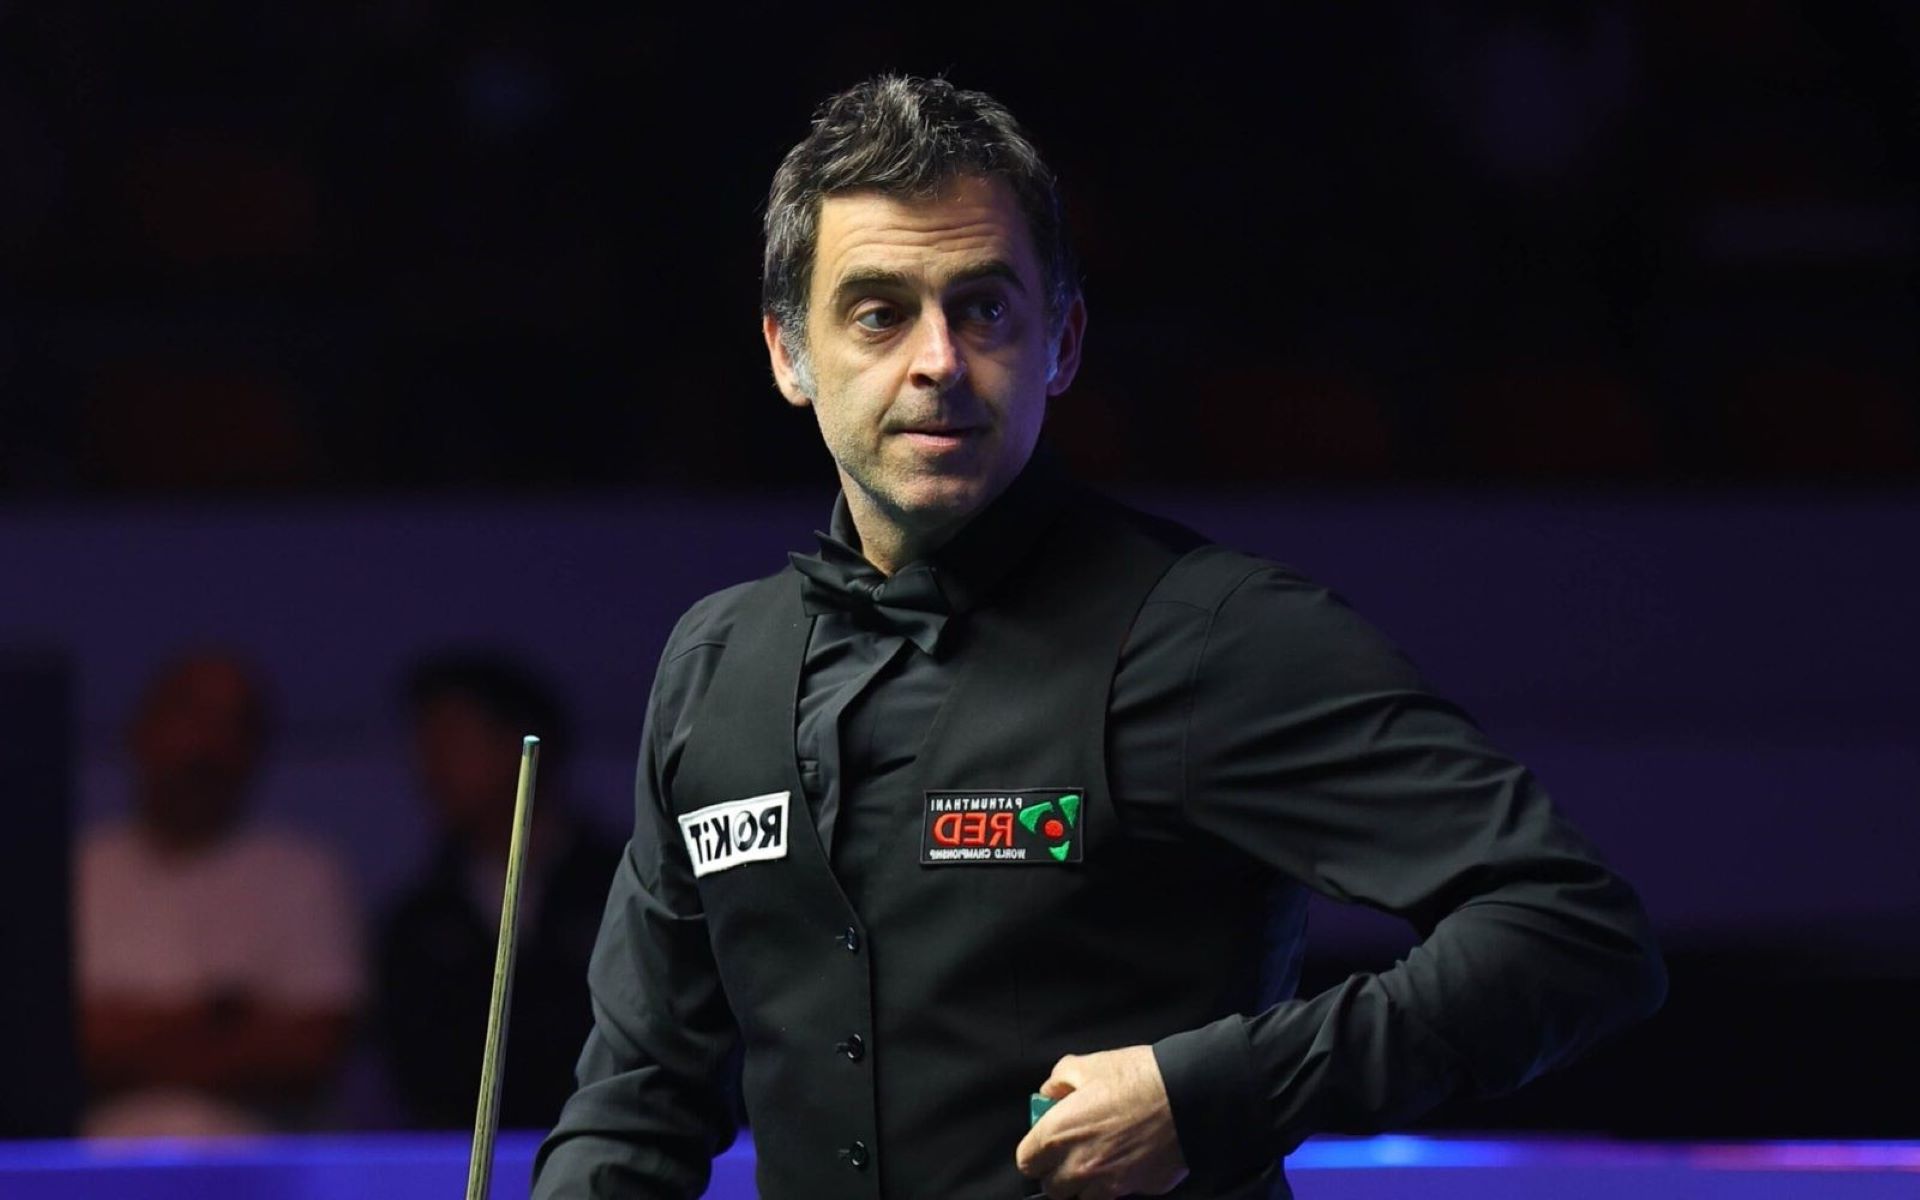 An Interview With Running Enthusiast And Snooker Legend Ronnie O'Sullivan